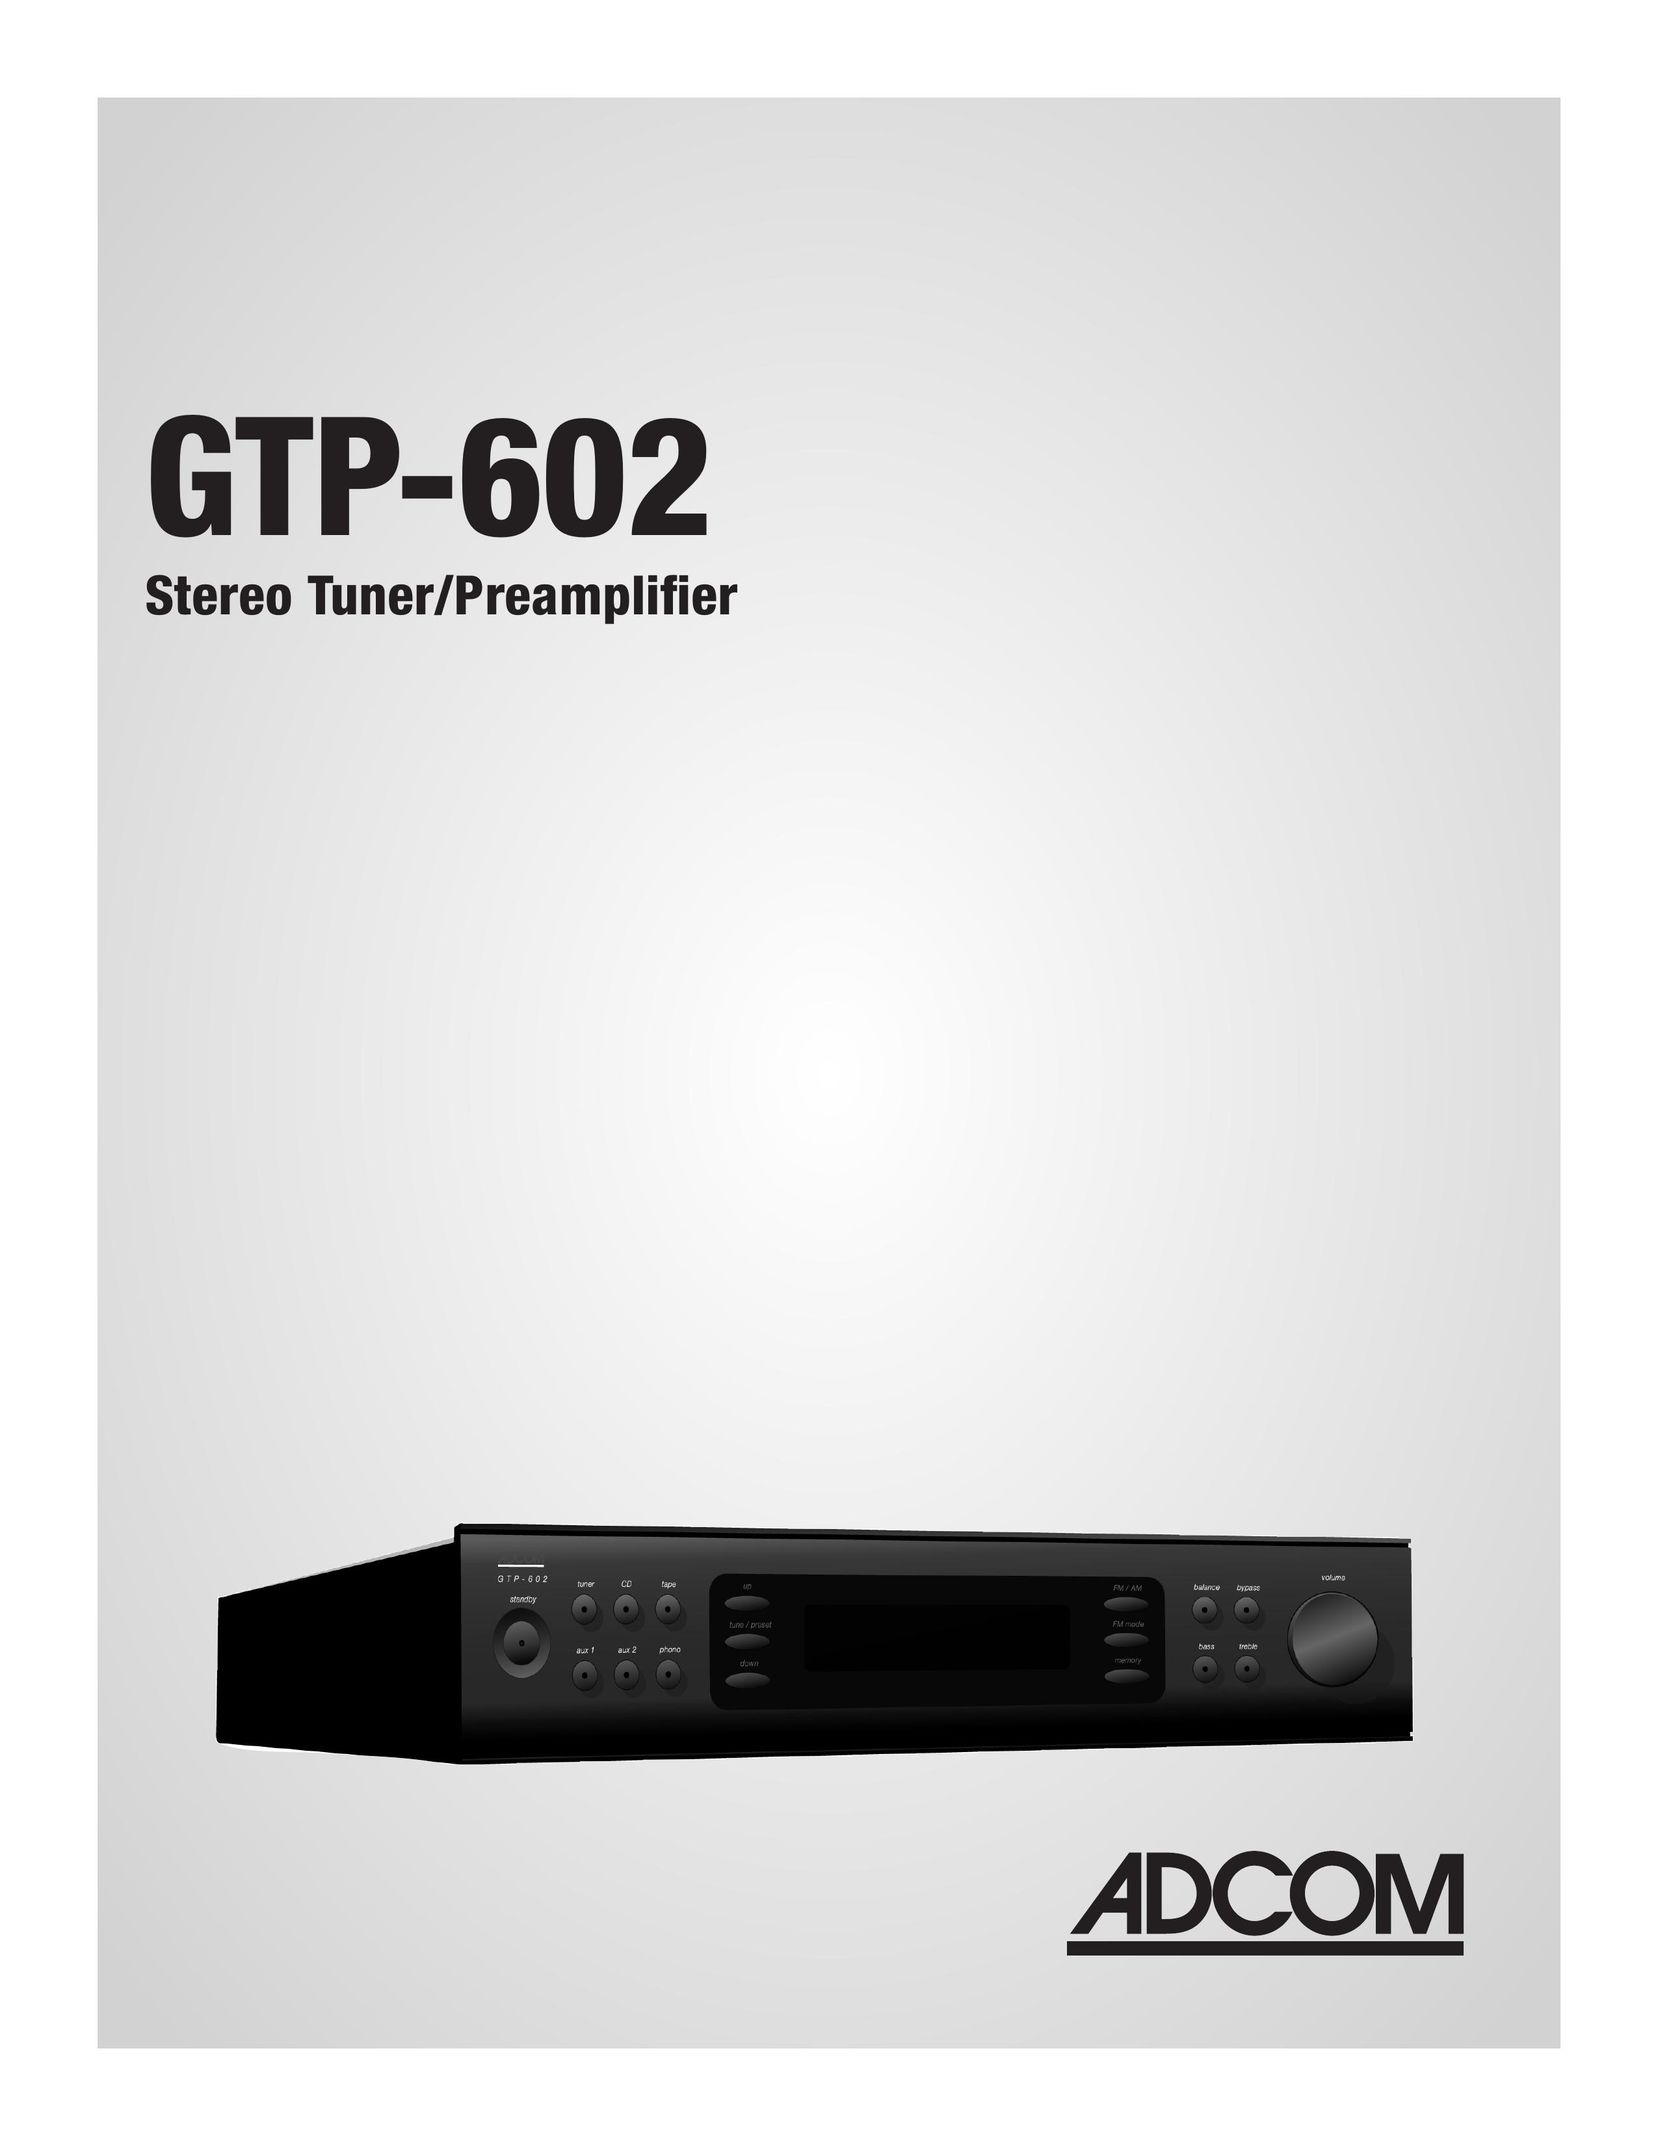 Adcom GTP-602 Stereo Amplifier User Manual (Page 1)